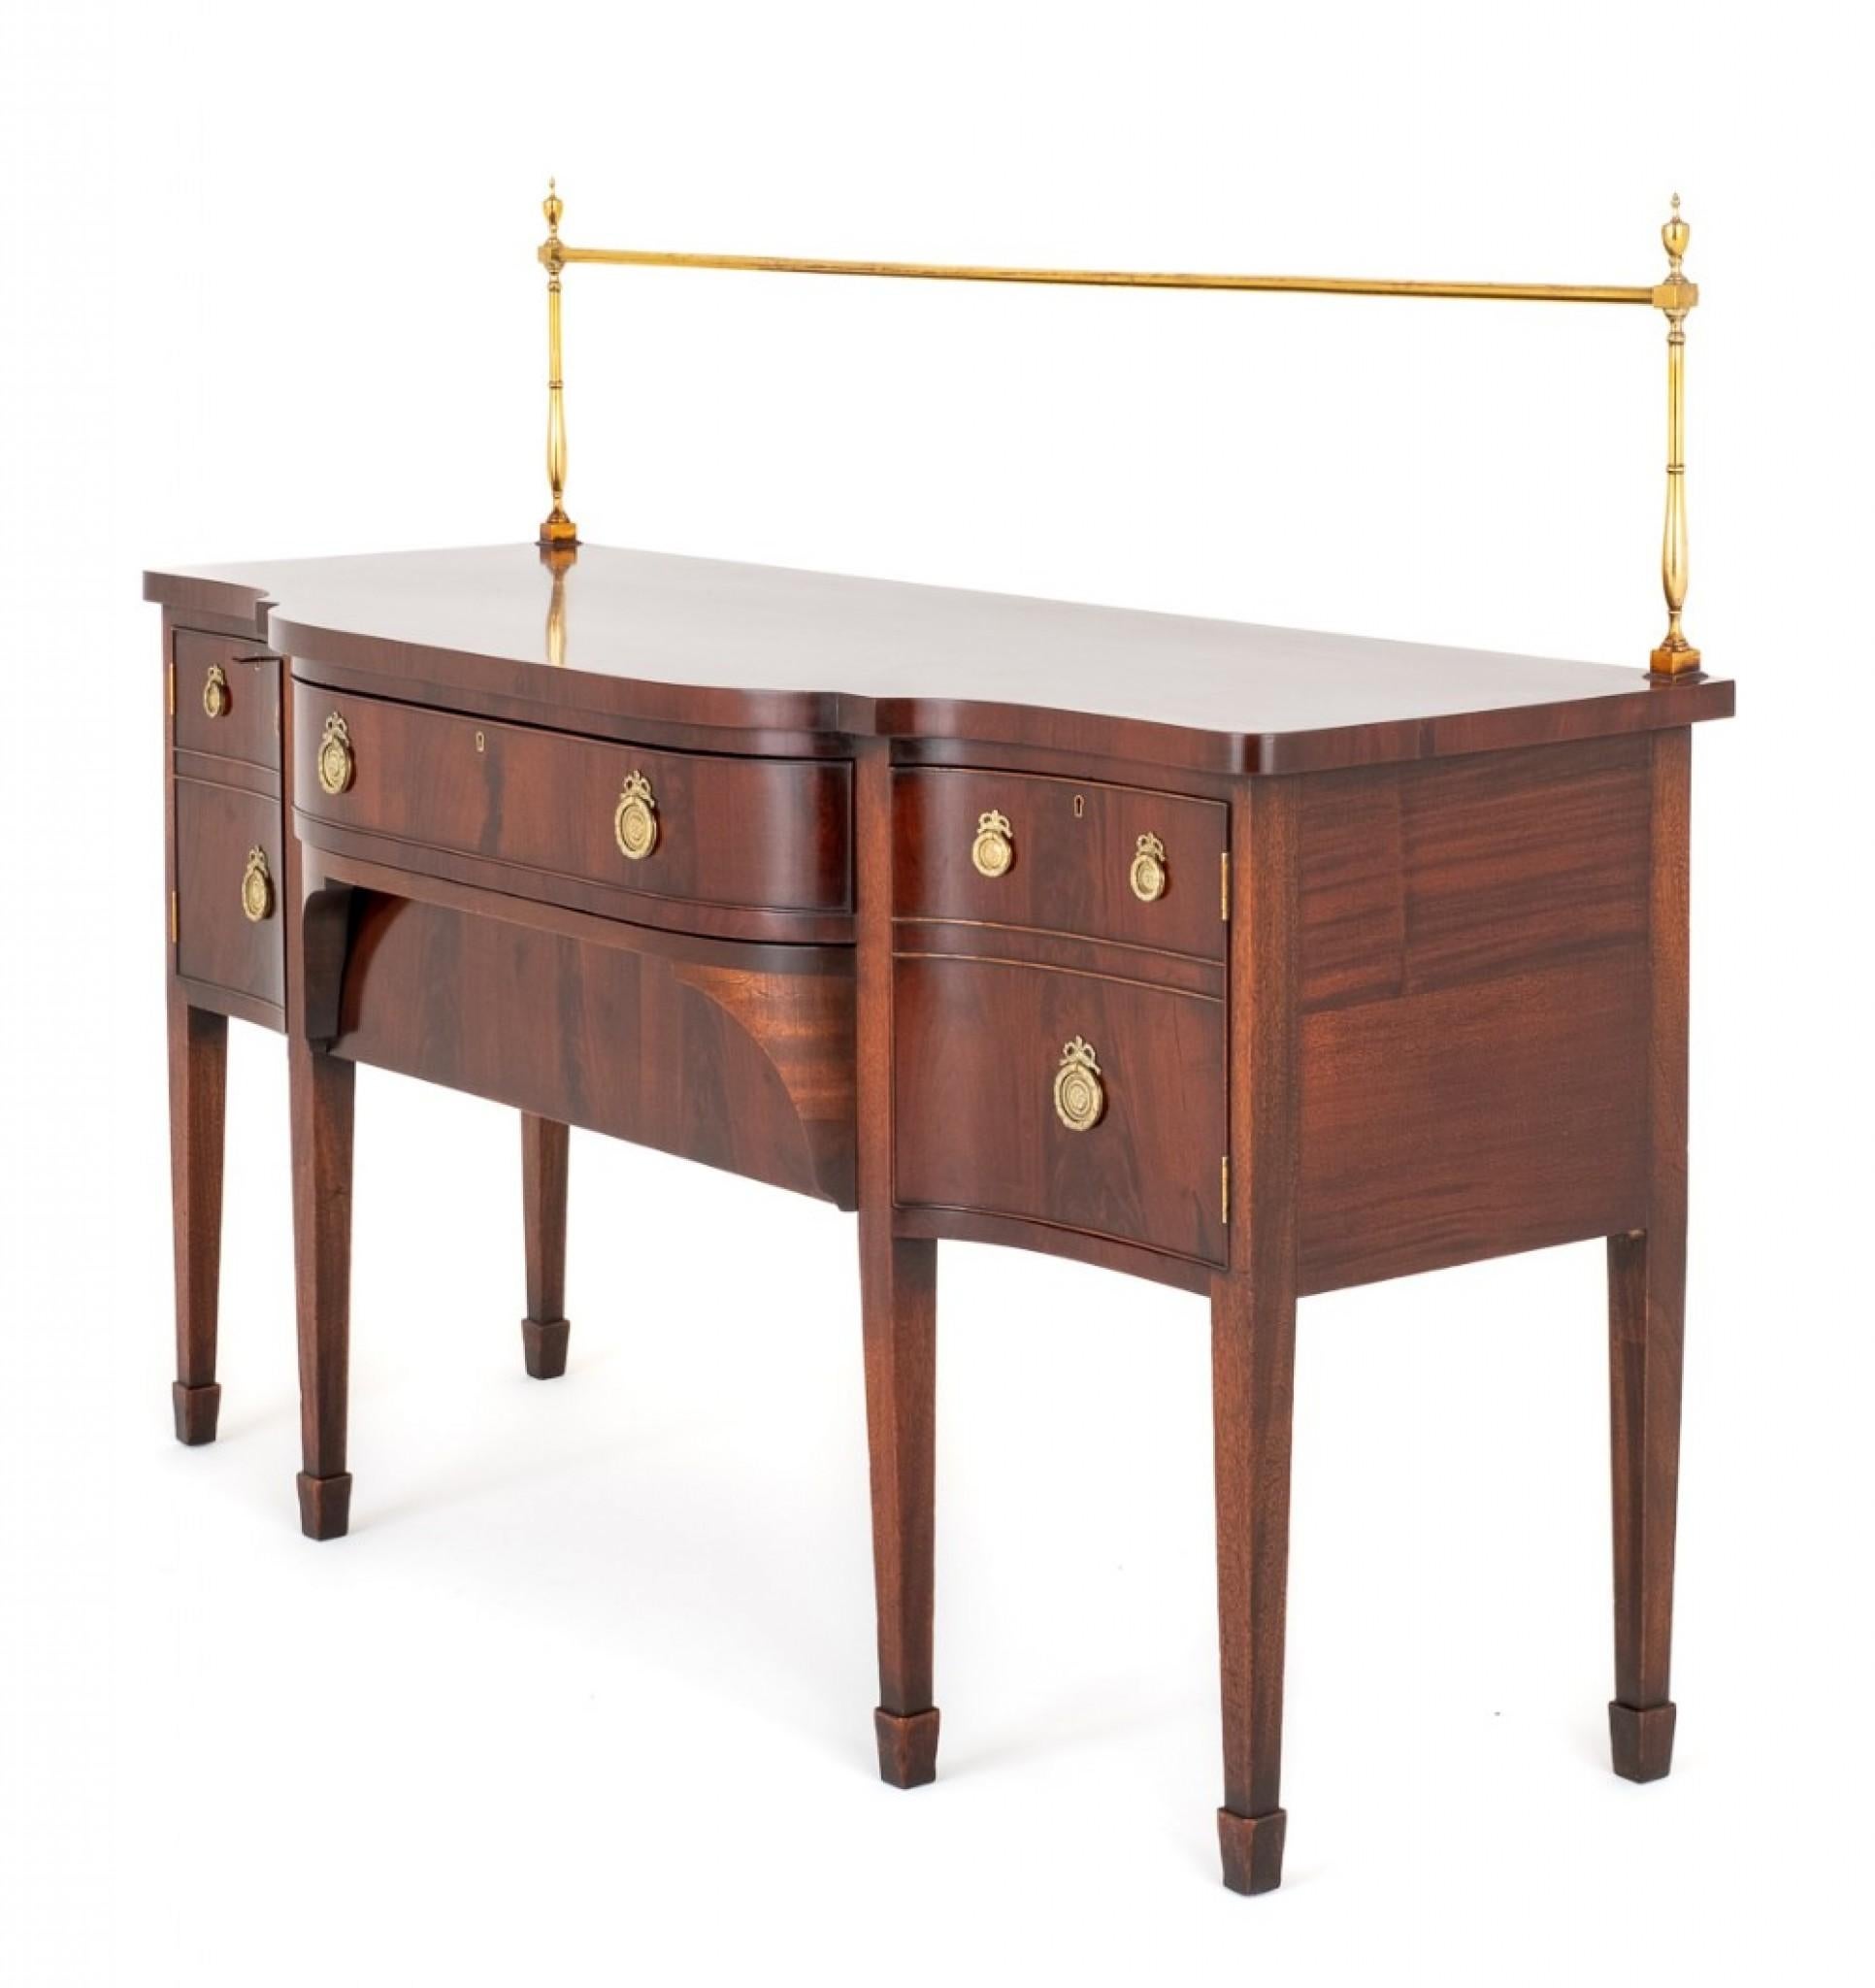 Regency Mahogany Sideboard.
This Sideboard Being of a Classical Regency Form.
Standing Upon Tapered Legs With Spade Feet.
The Sideboard is of a Shaped Form and Features 2 Mahogany Lined Drawers Flanked by Cupboards.
Circa 19th Century
The Sideboard